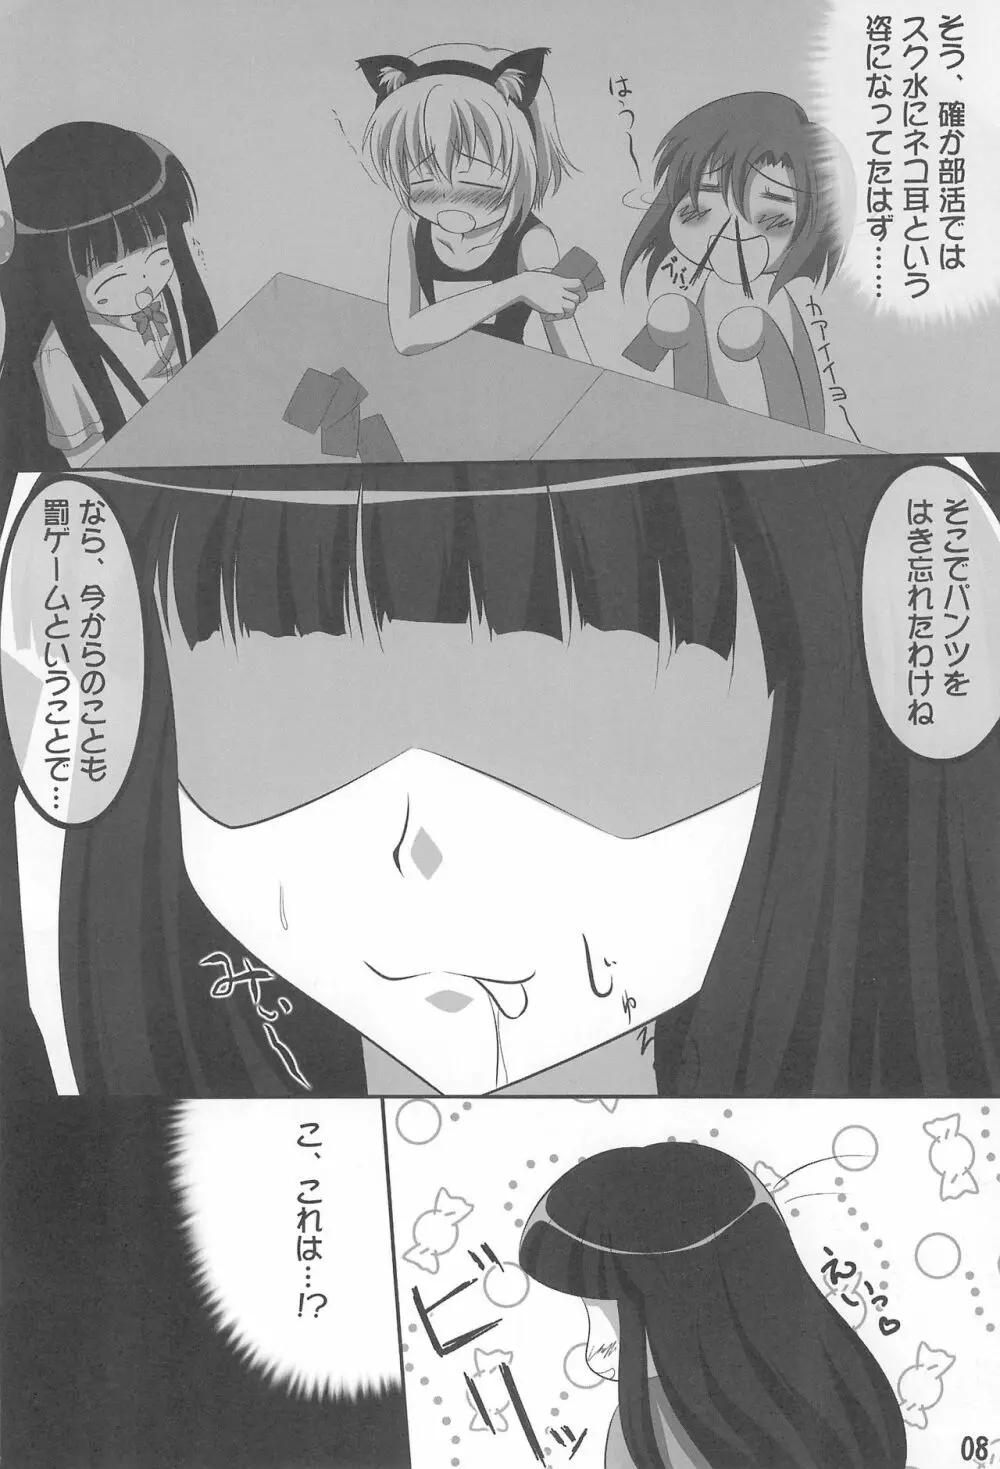 Tips 部活の後の… - page8